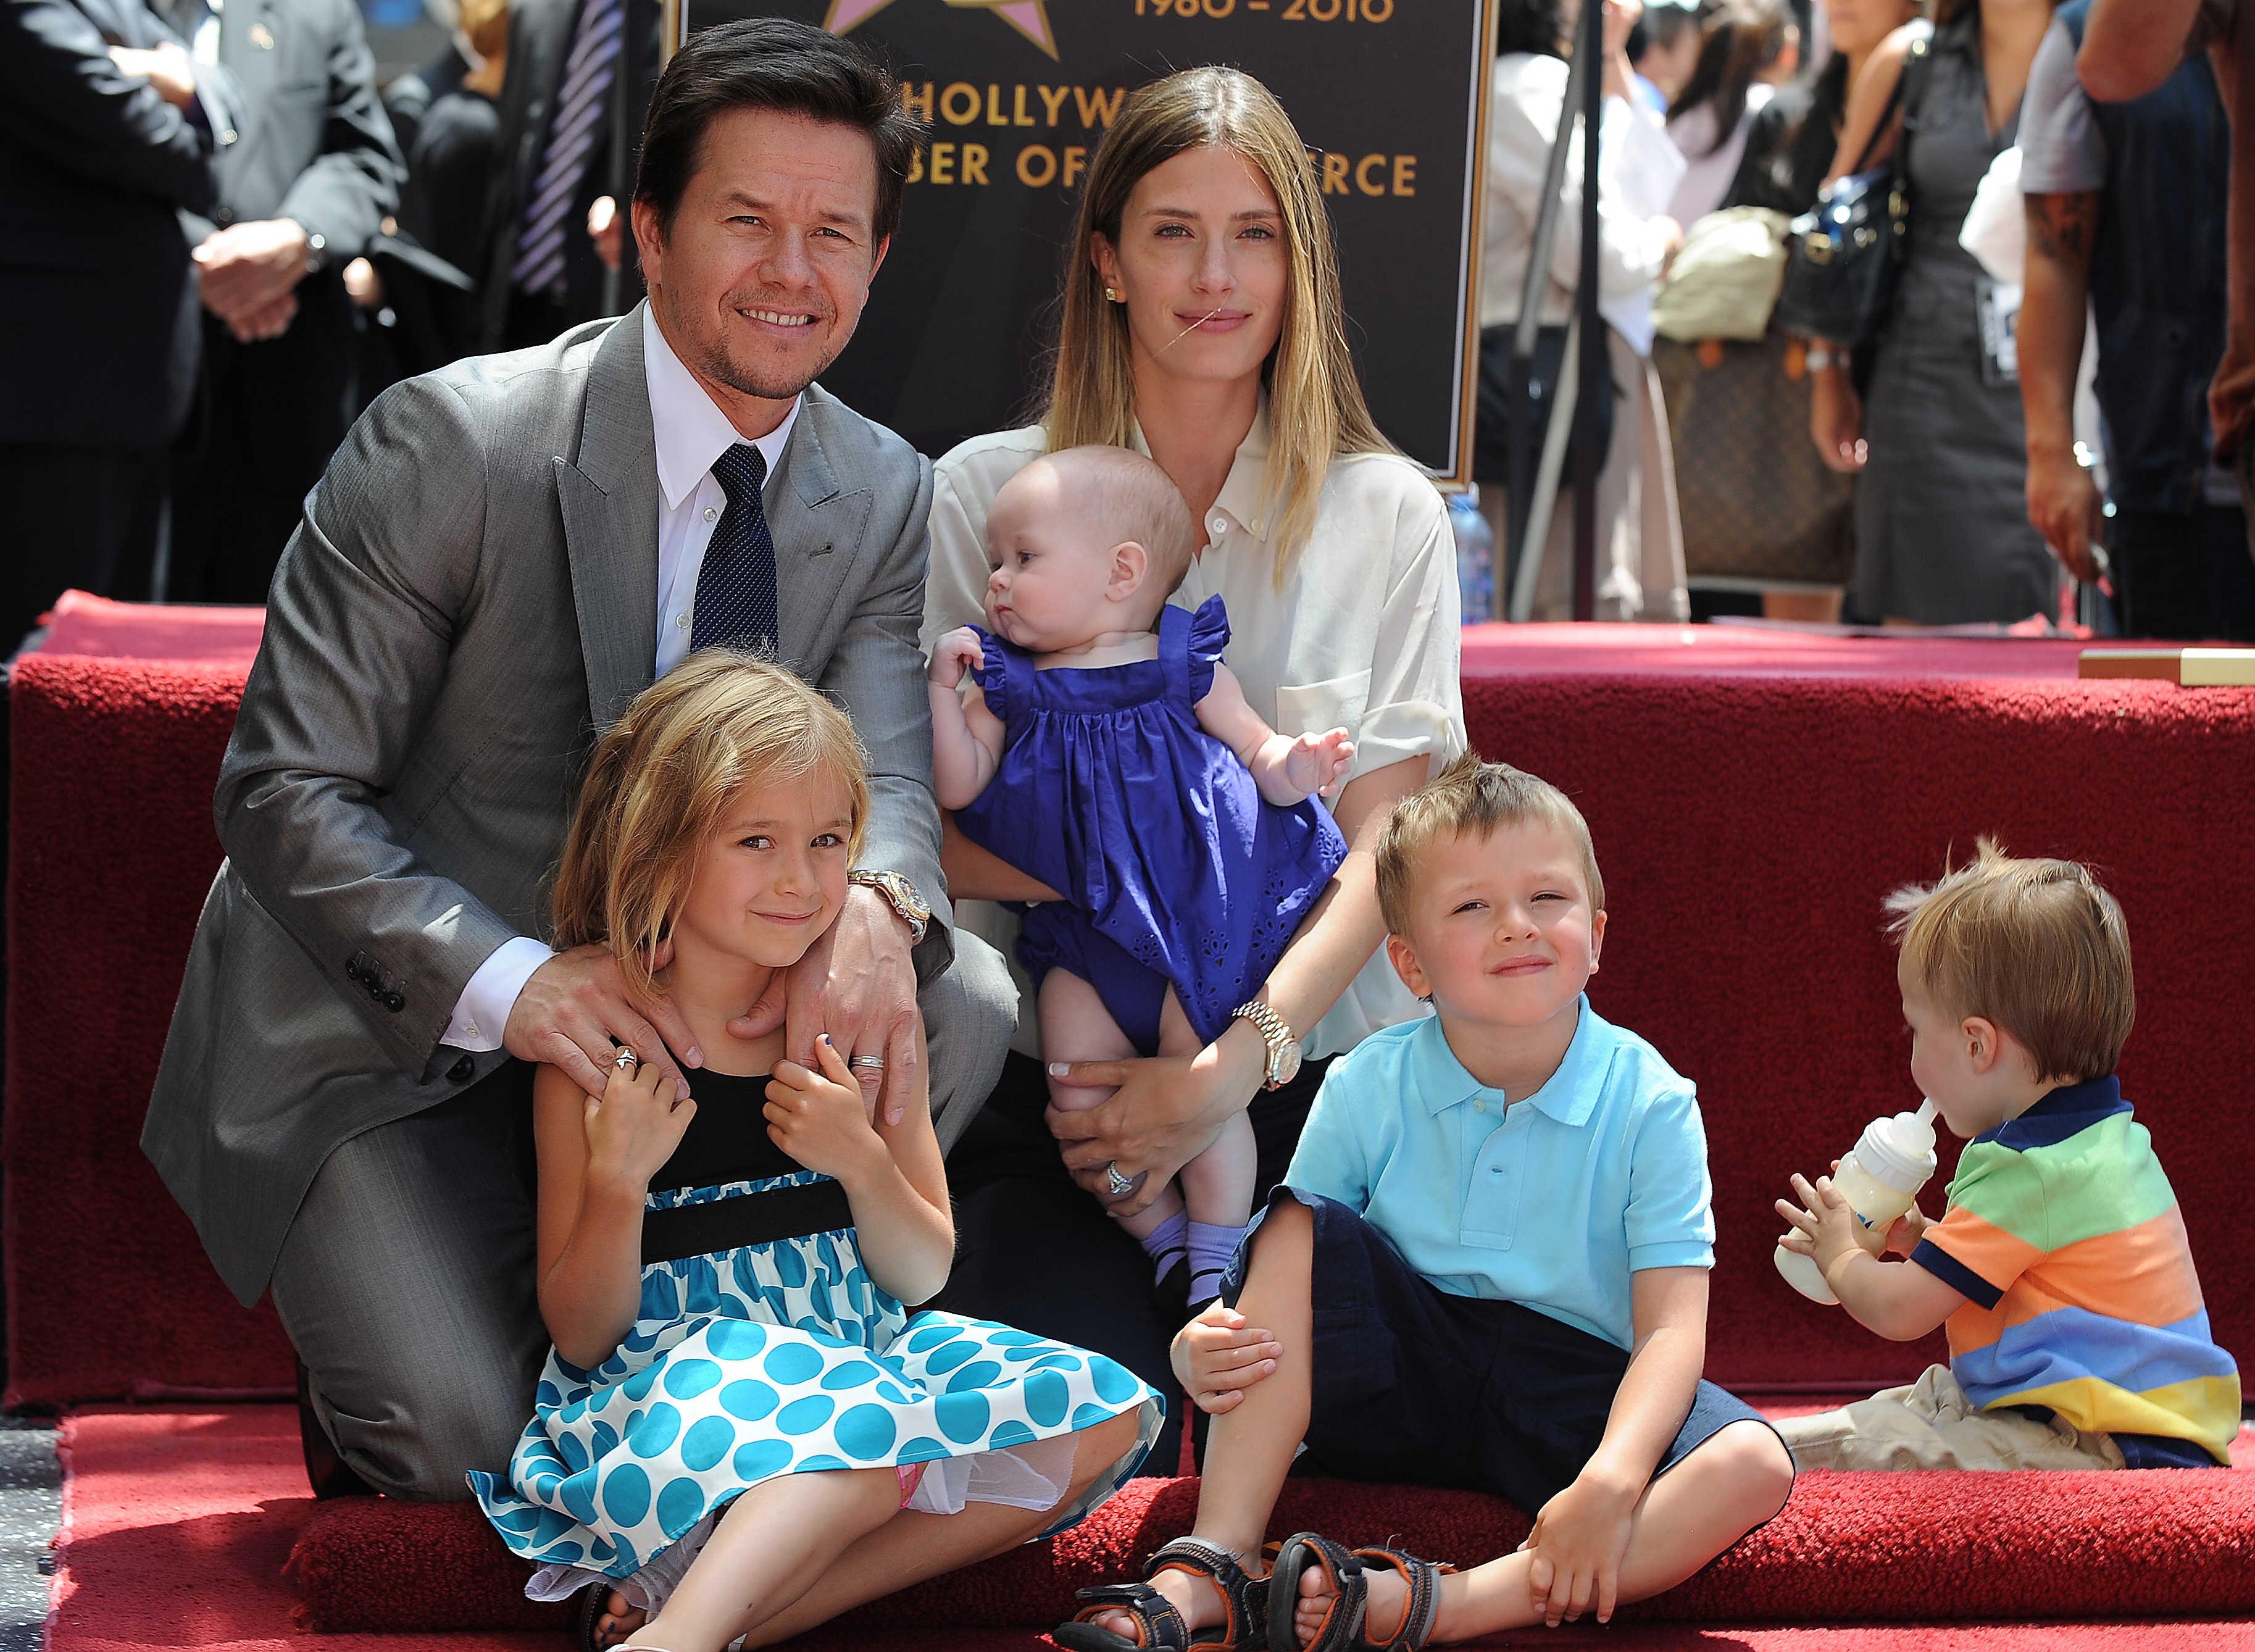 <p>Mark Wahlberg posed with his family — wife Rhea Durham, a former model, and kids Ella (then 6), Grace (then 6 months), Michael (then 4) and Brendan (then 1) — at his Hollywood Walk of Fame star ceremony on July 29, 2010. Keep reading to see his two eldest children all grown up…</p>